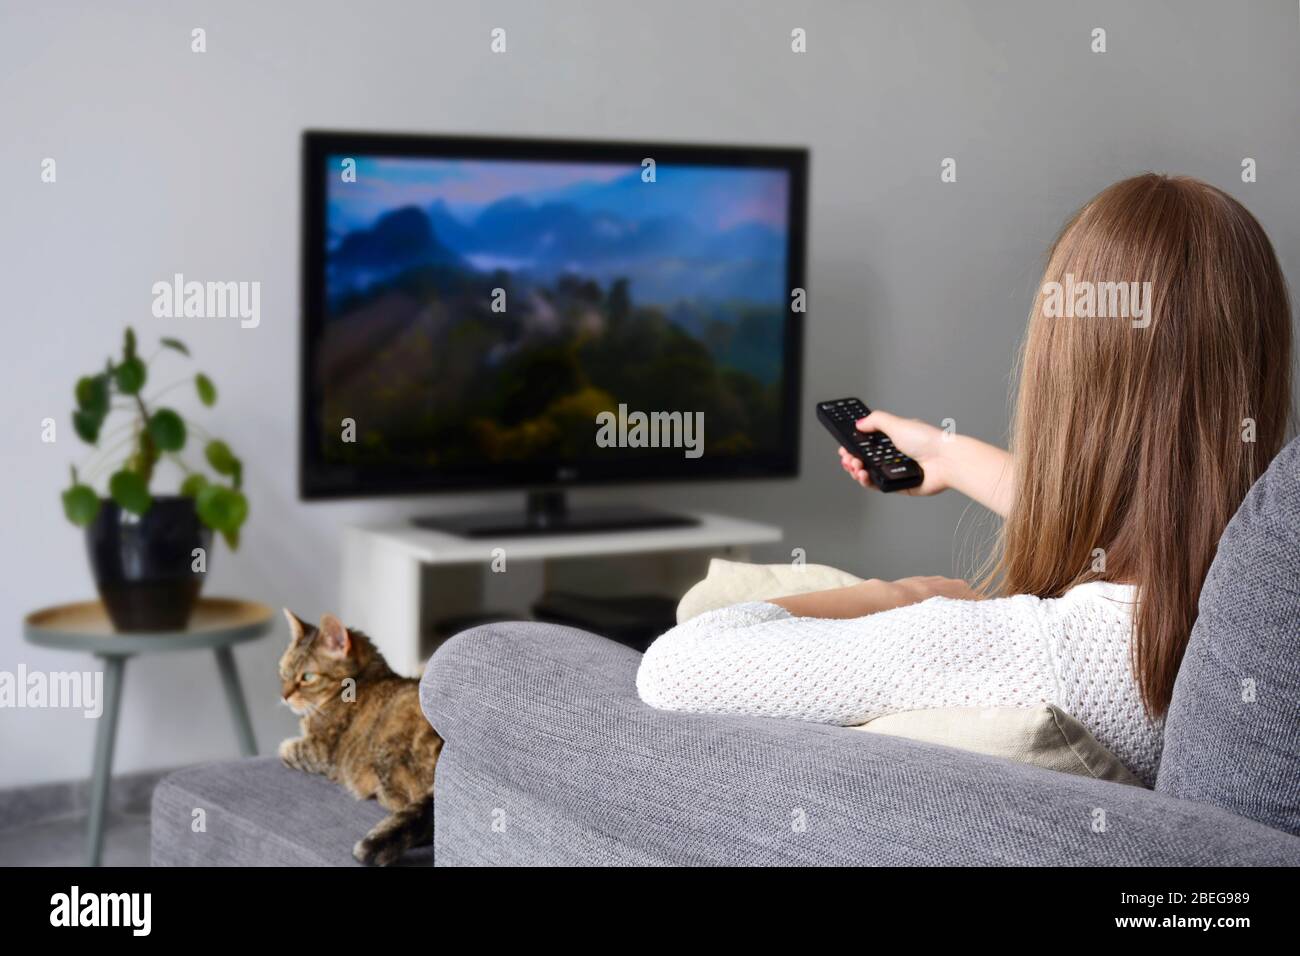 A young woman watching TV while sitting with her cat on sofa in living room at home. Nature, documentary, tv screen, binge watching Stock Photo